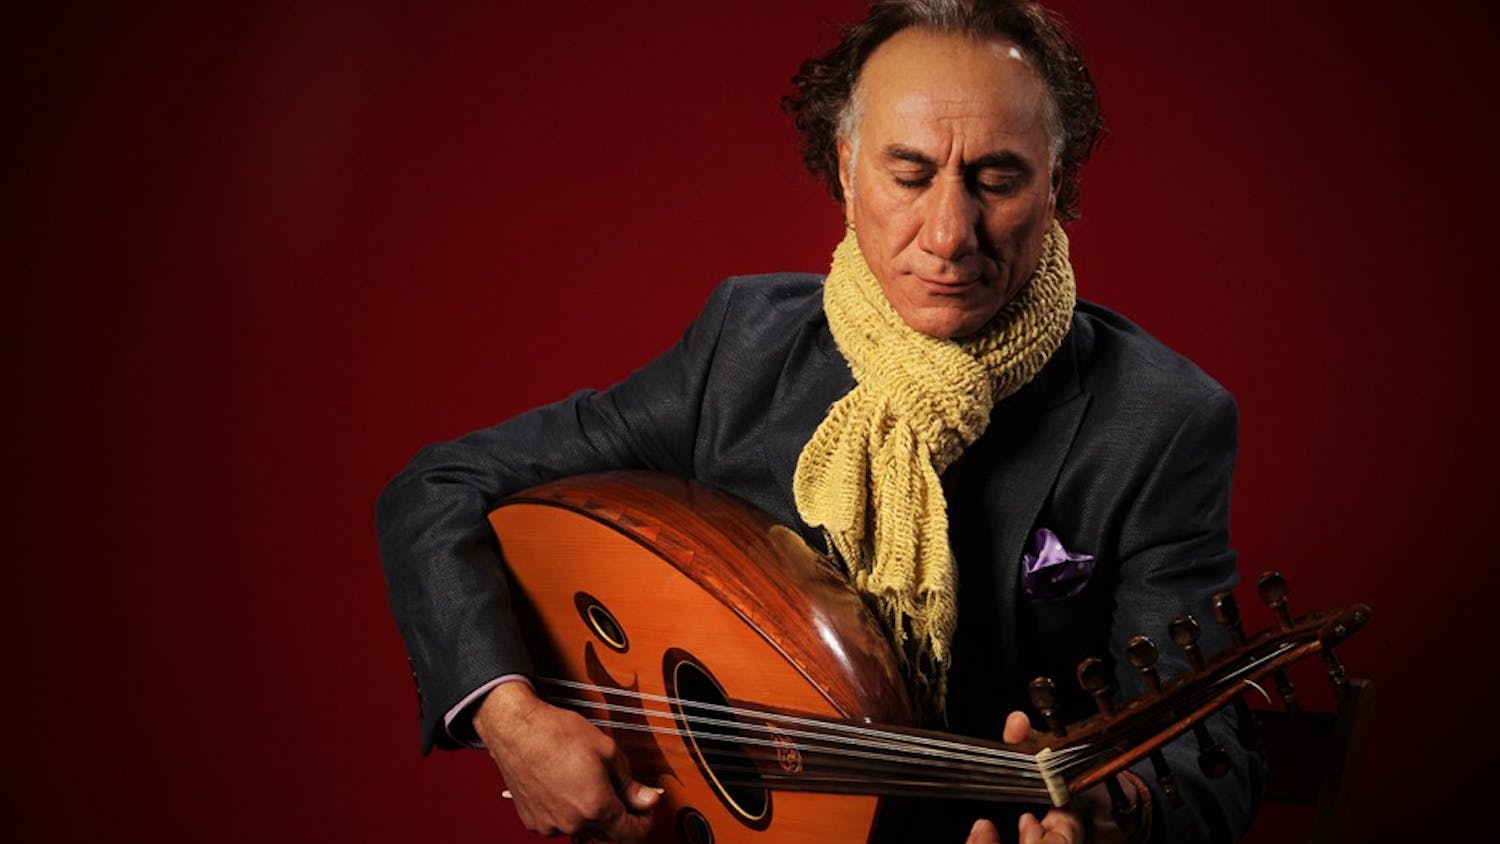 Rahim AlHaj is a Grammy-nominated oud player and political refugee. The oud&nbsp;is an Iraqi instrument in the same family as the guitar. He is coming to Bloomington for the second time for Lotus Blossoms, a program which spans five weeks and takes different artists from cultures around the world and brings them to the public and school children of Monroe County.